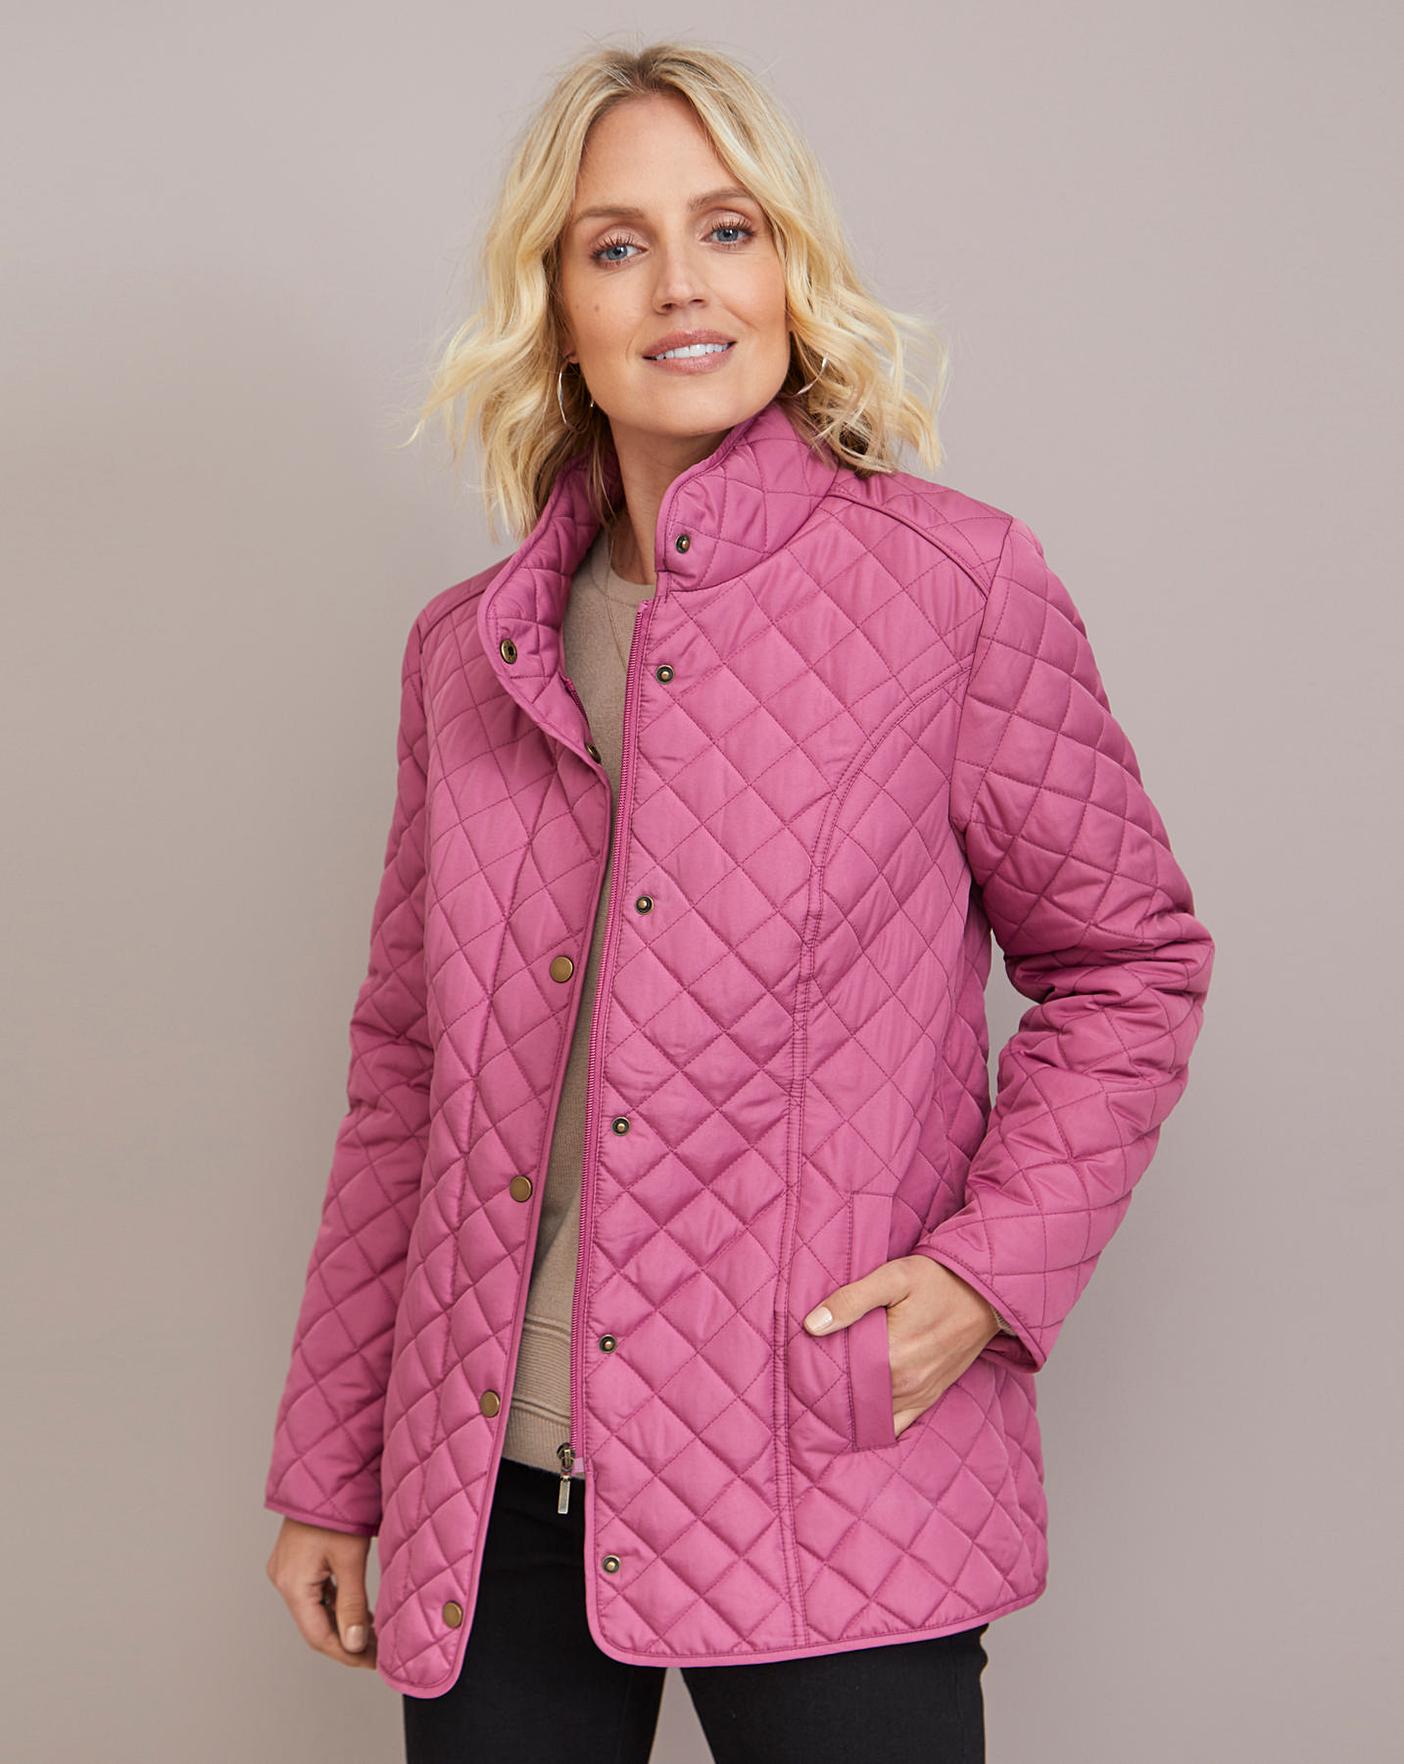 Julipa Short Quilted Jacket | Oxendales